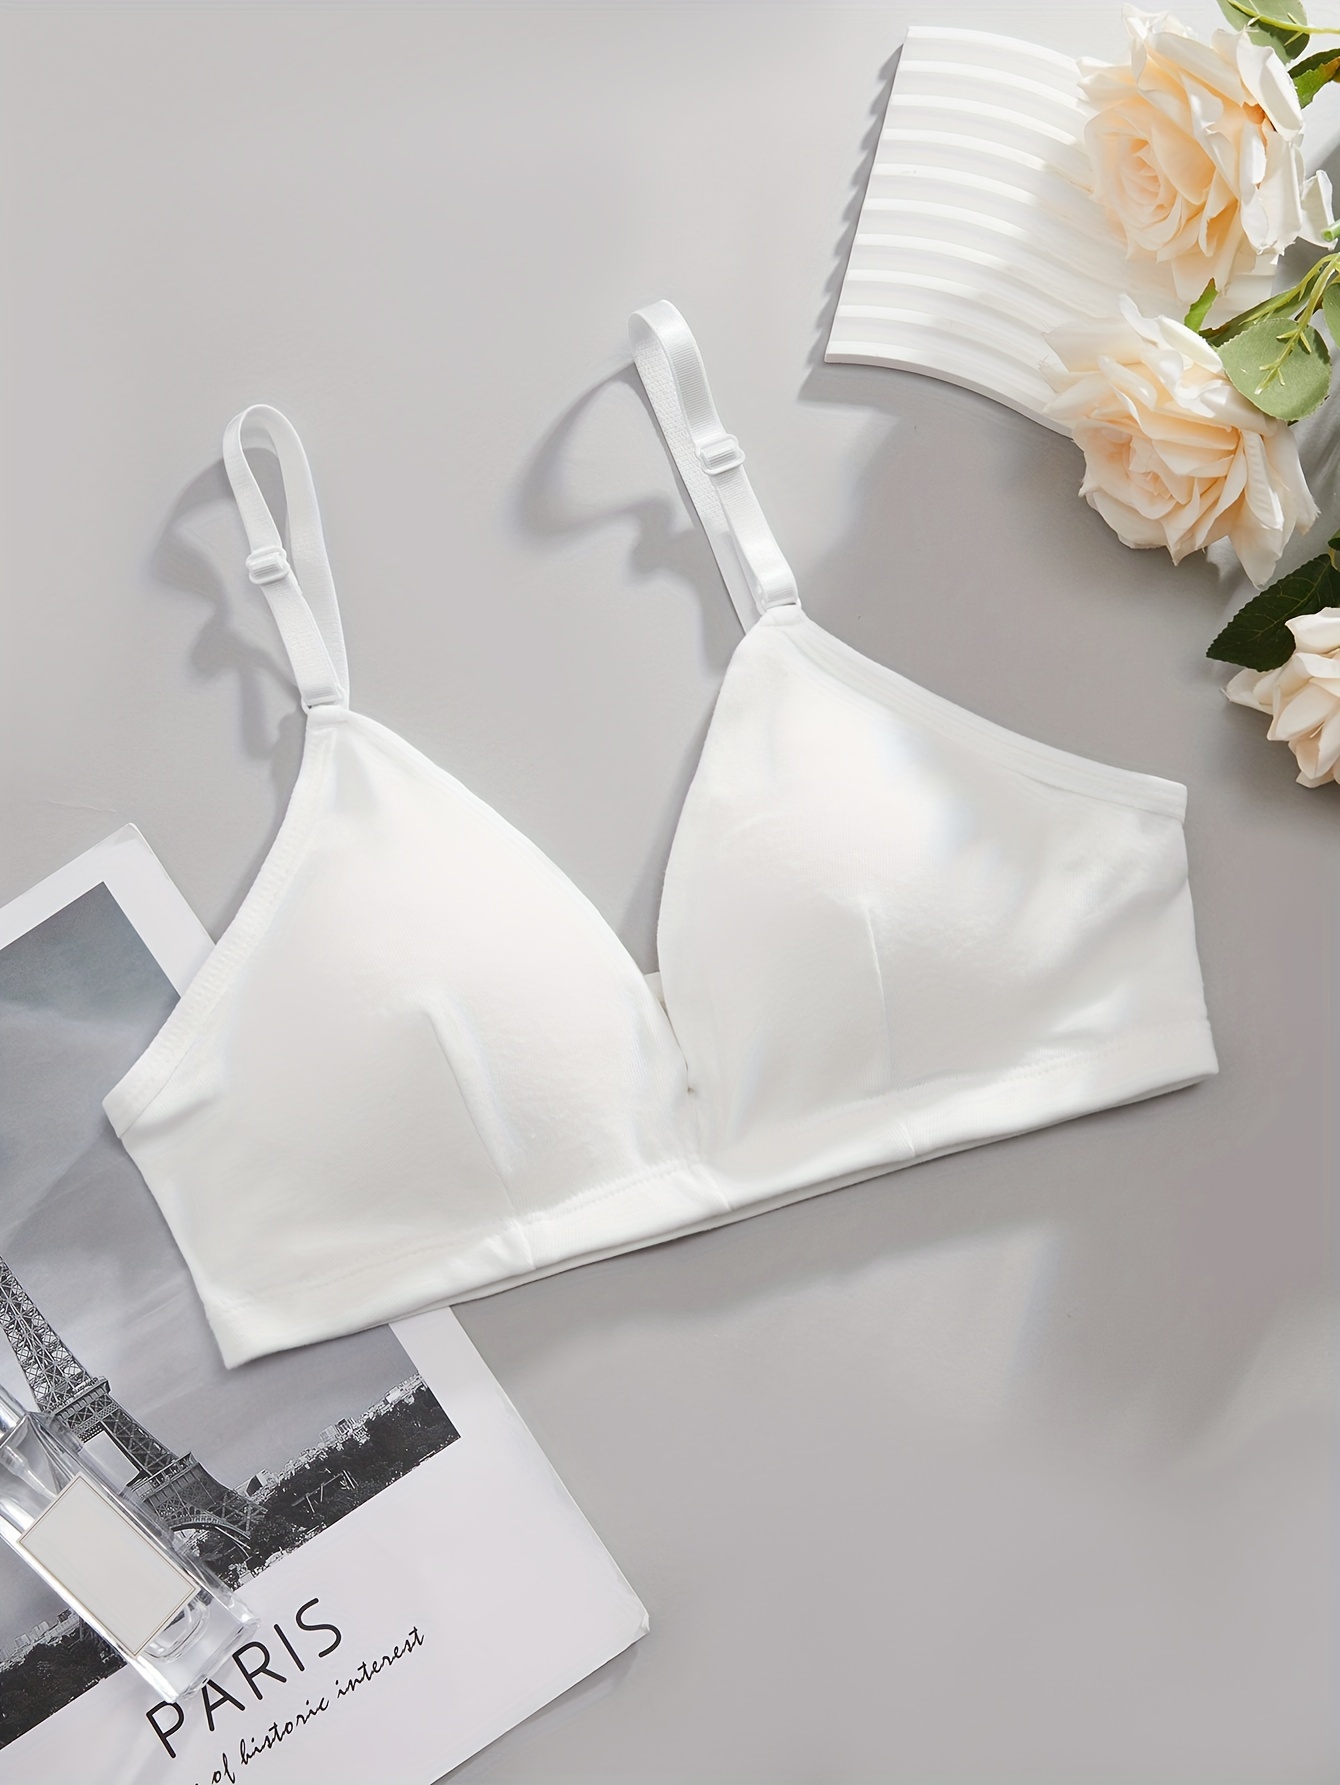 Simple Solid Wireless Bras Comfy Breathable Intimates Bra - Temu